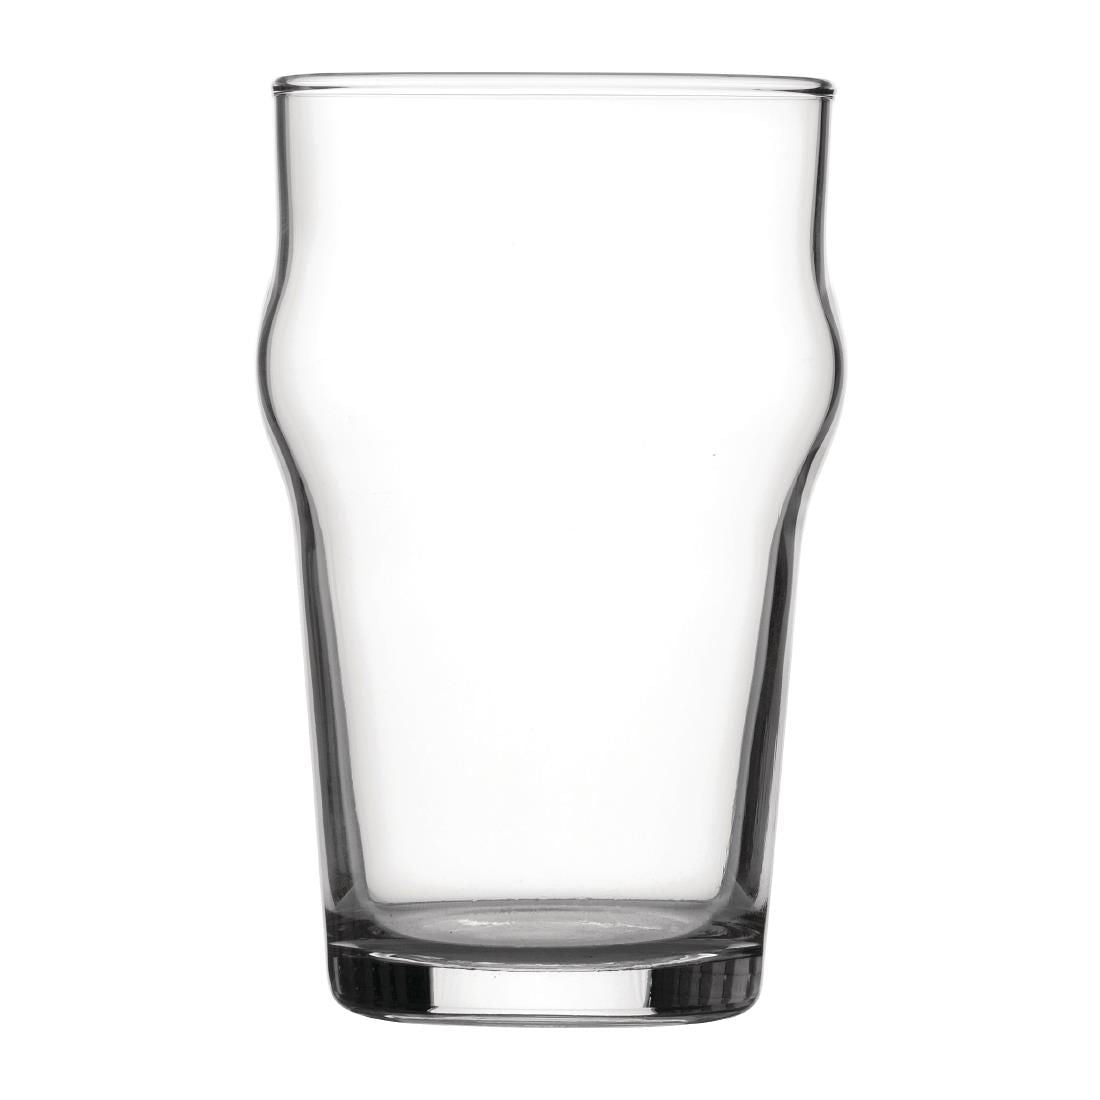 DB553 Utopia Nonic Beer Glasses 280ml CE Marked (Pack of 48) JD Catering Equipment Solutions Ltd